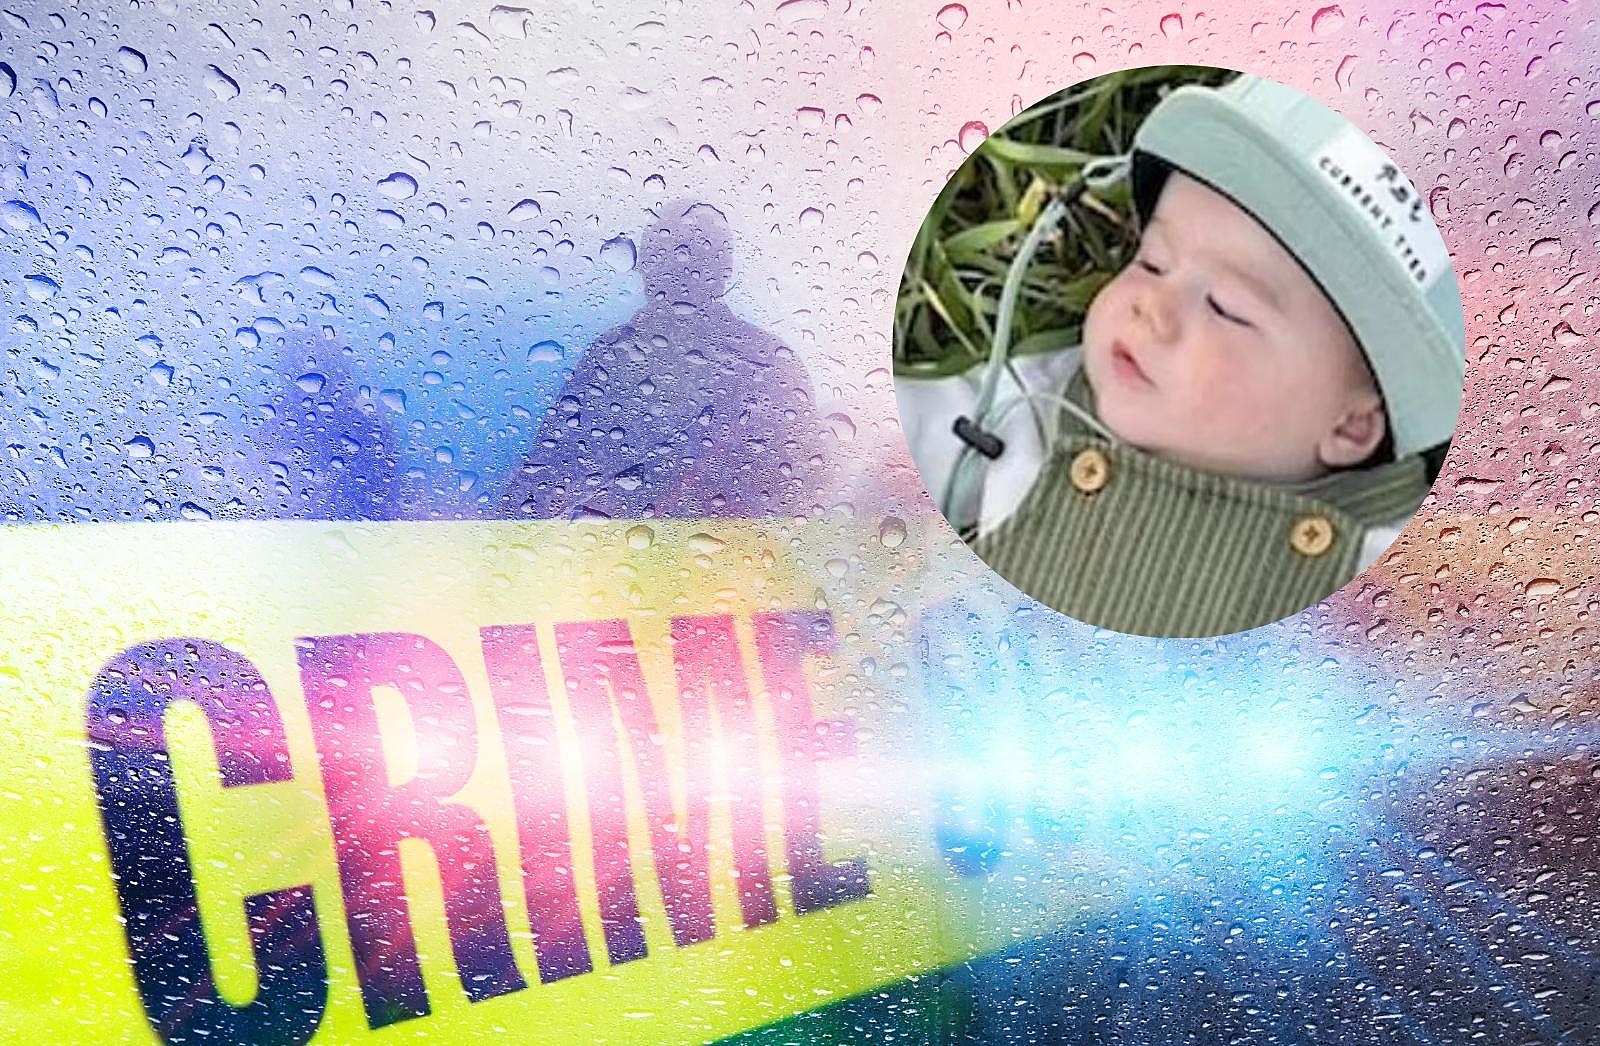 Mother of Missing Baby Found Dead at Her Home, Active Amber Alert for
Son